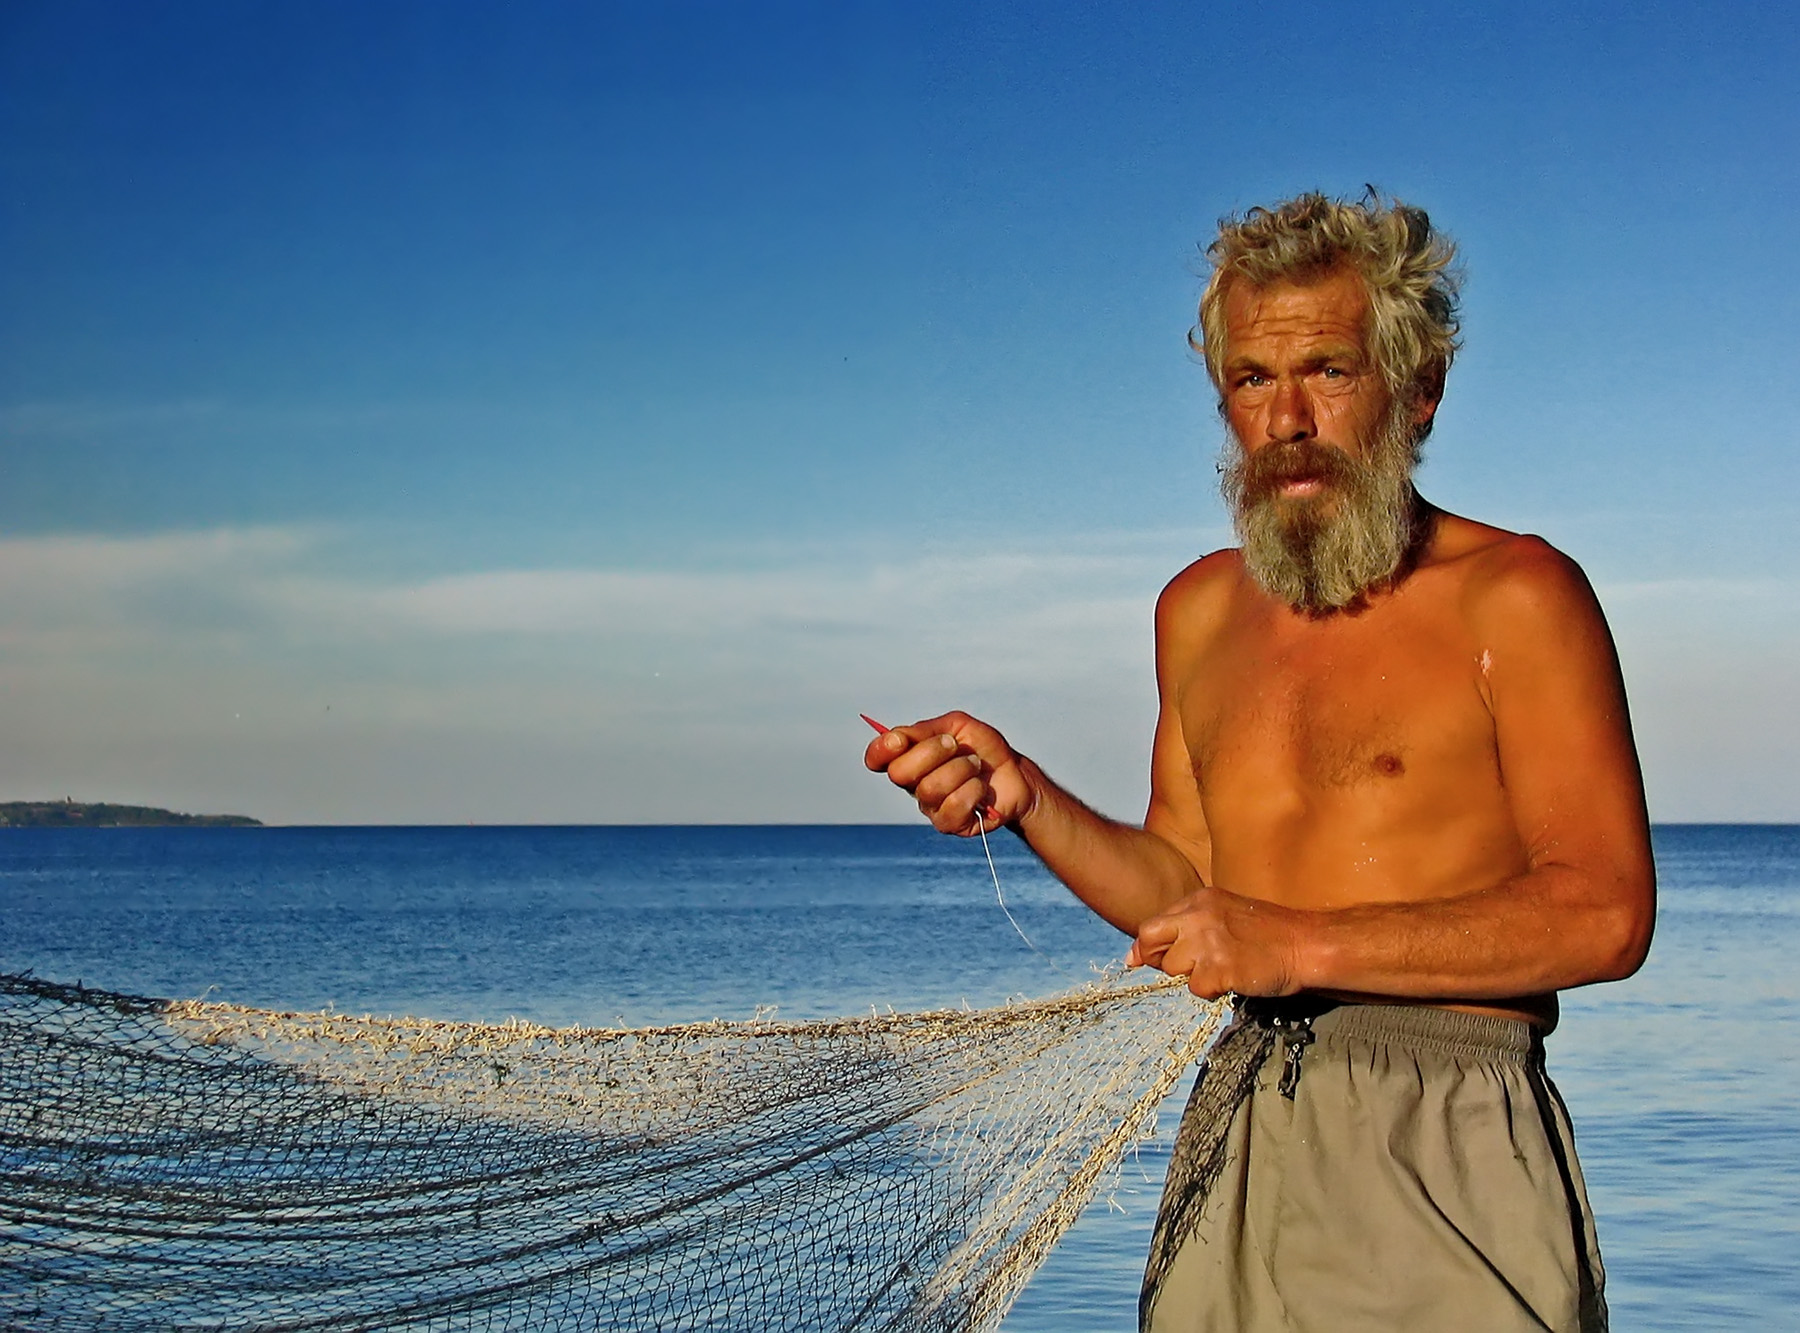 The old Man and the Sea, Blue, Bspo06, Fisherman, Male, HQ Photo